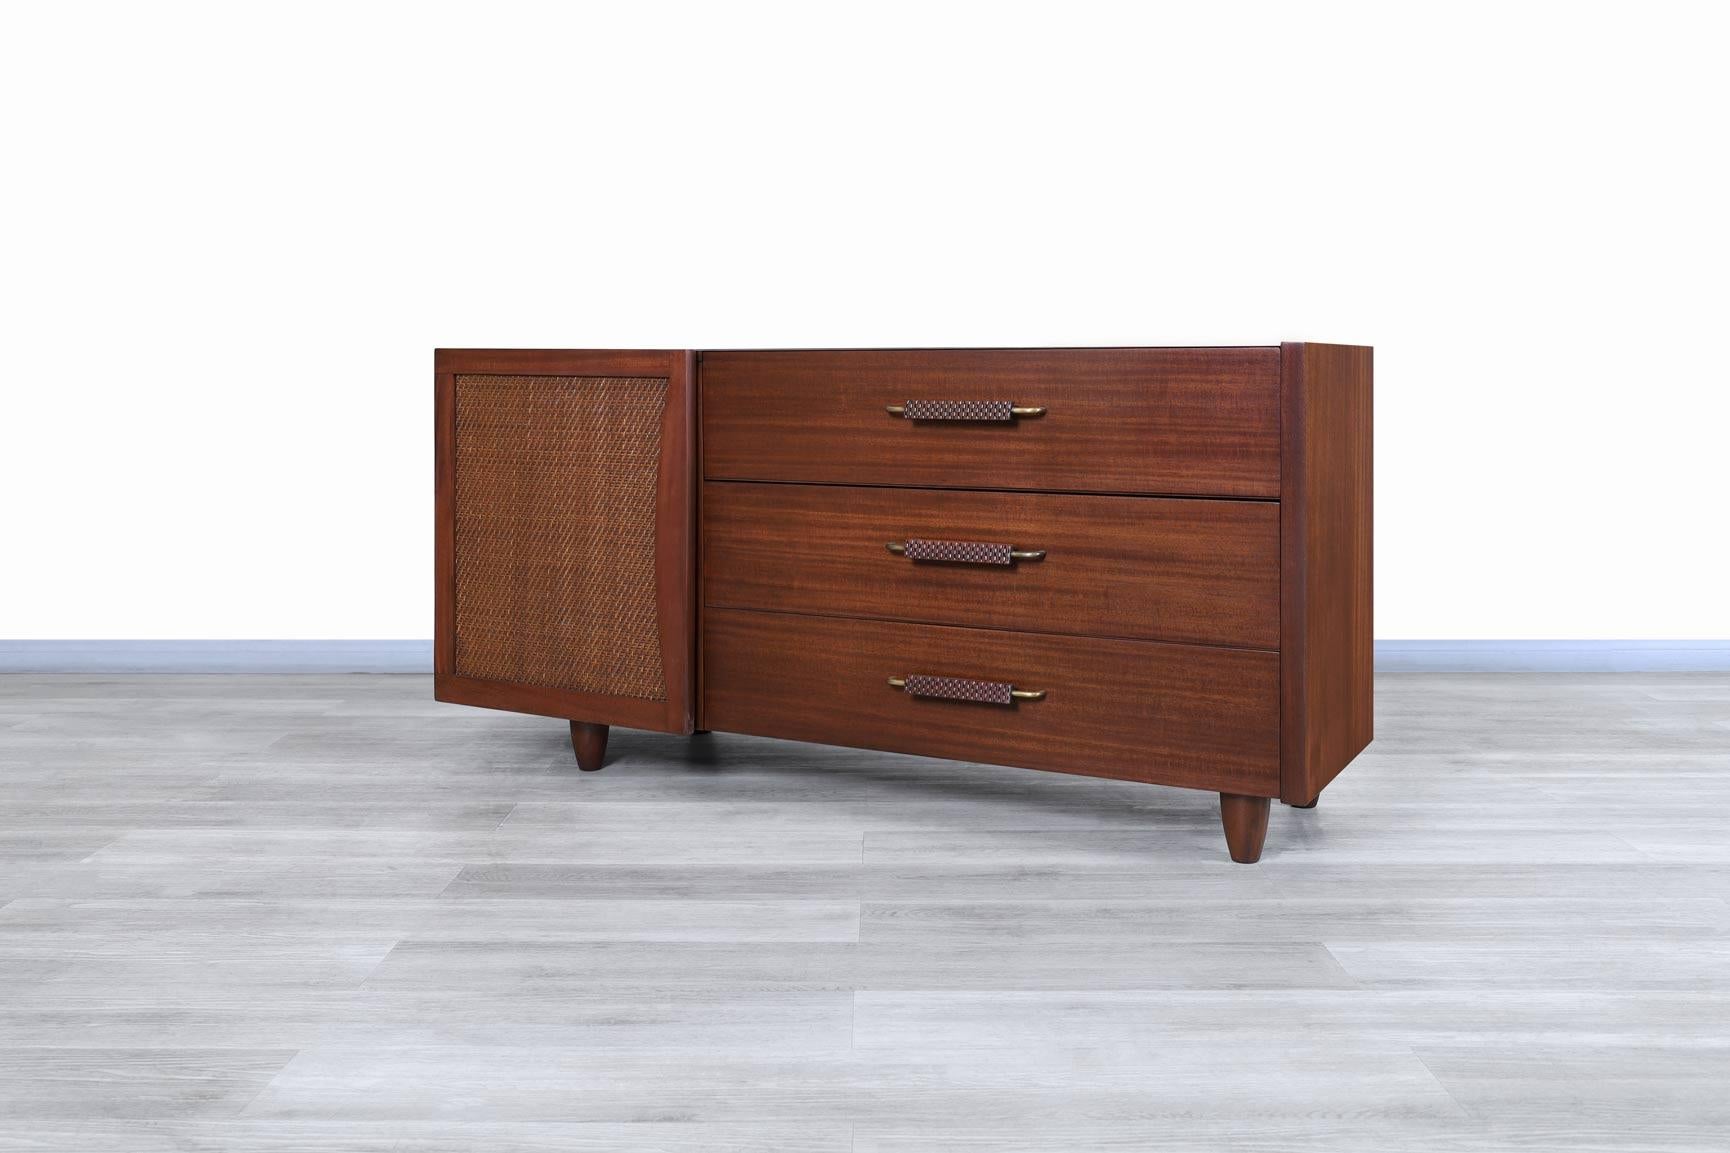 Wonderful Mexican modernist walnut credenza designed and manufactured in México, circa 1950s. This credenza has an innovative design that focuses on the details that make up its structure and is adequately complemented by the walnut-stained mahogany